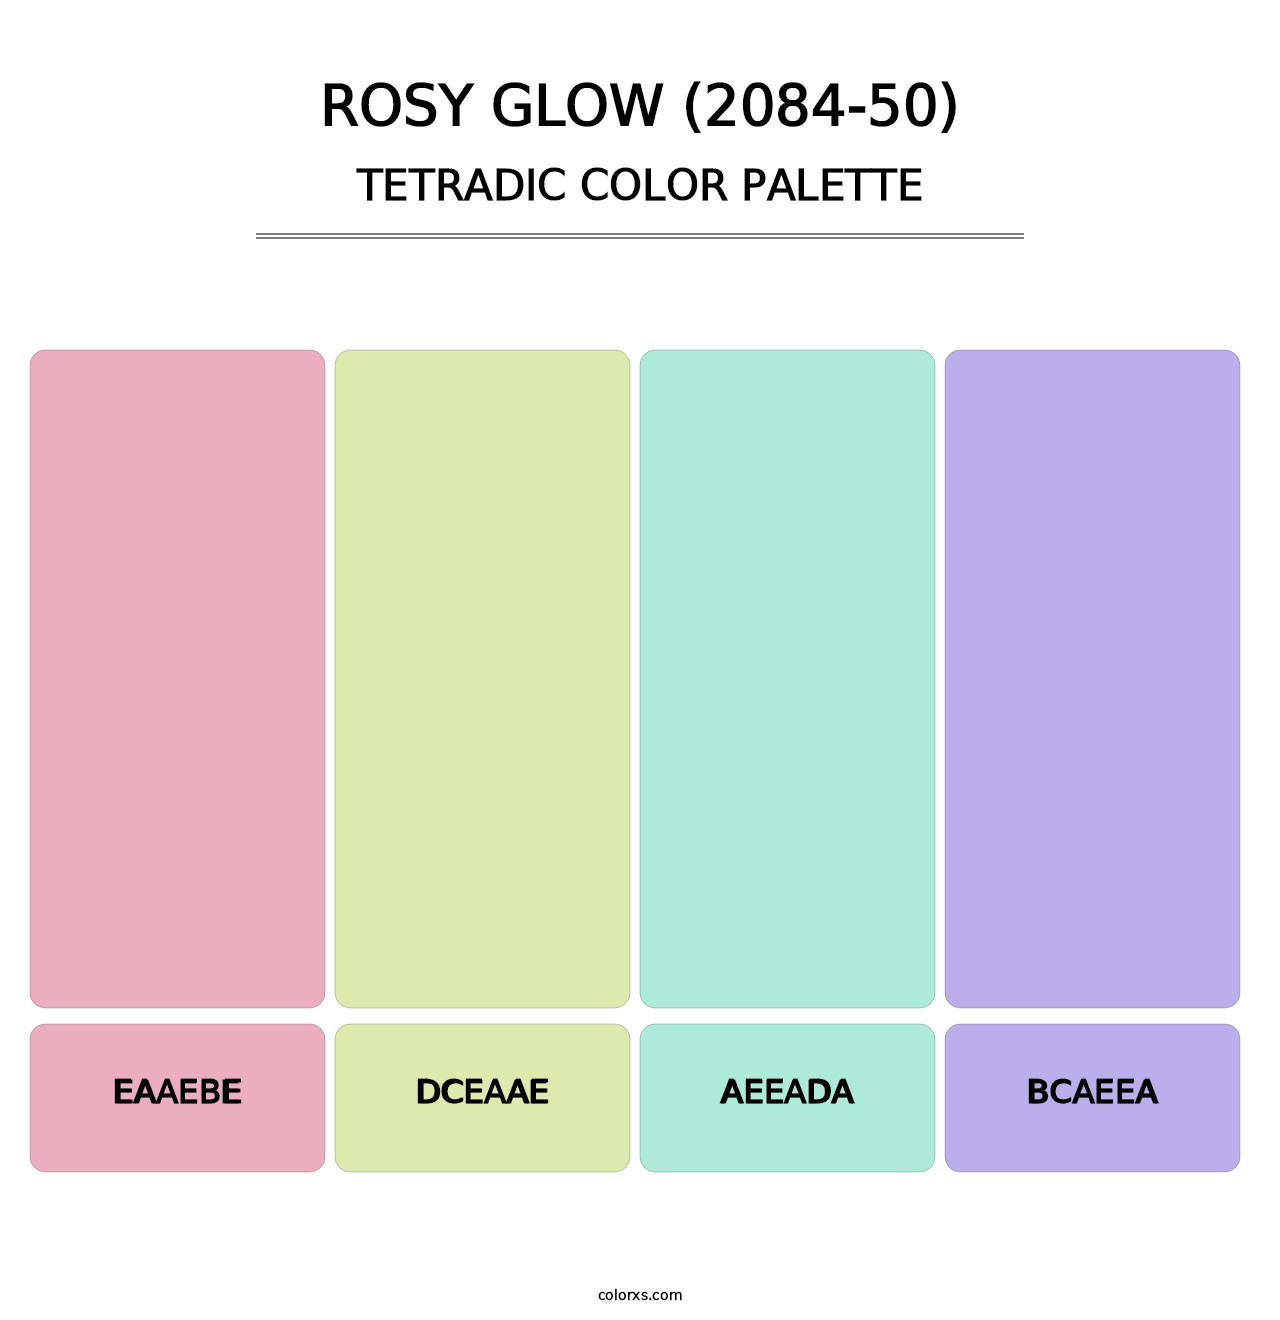 Rosy Glow (2084-50) - Tetradic Color Palette